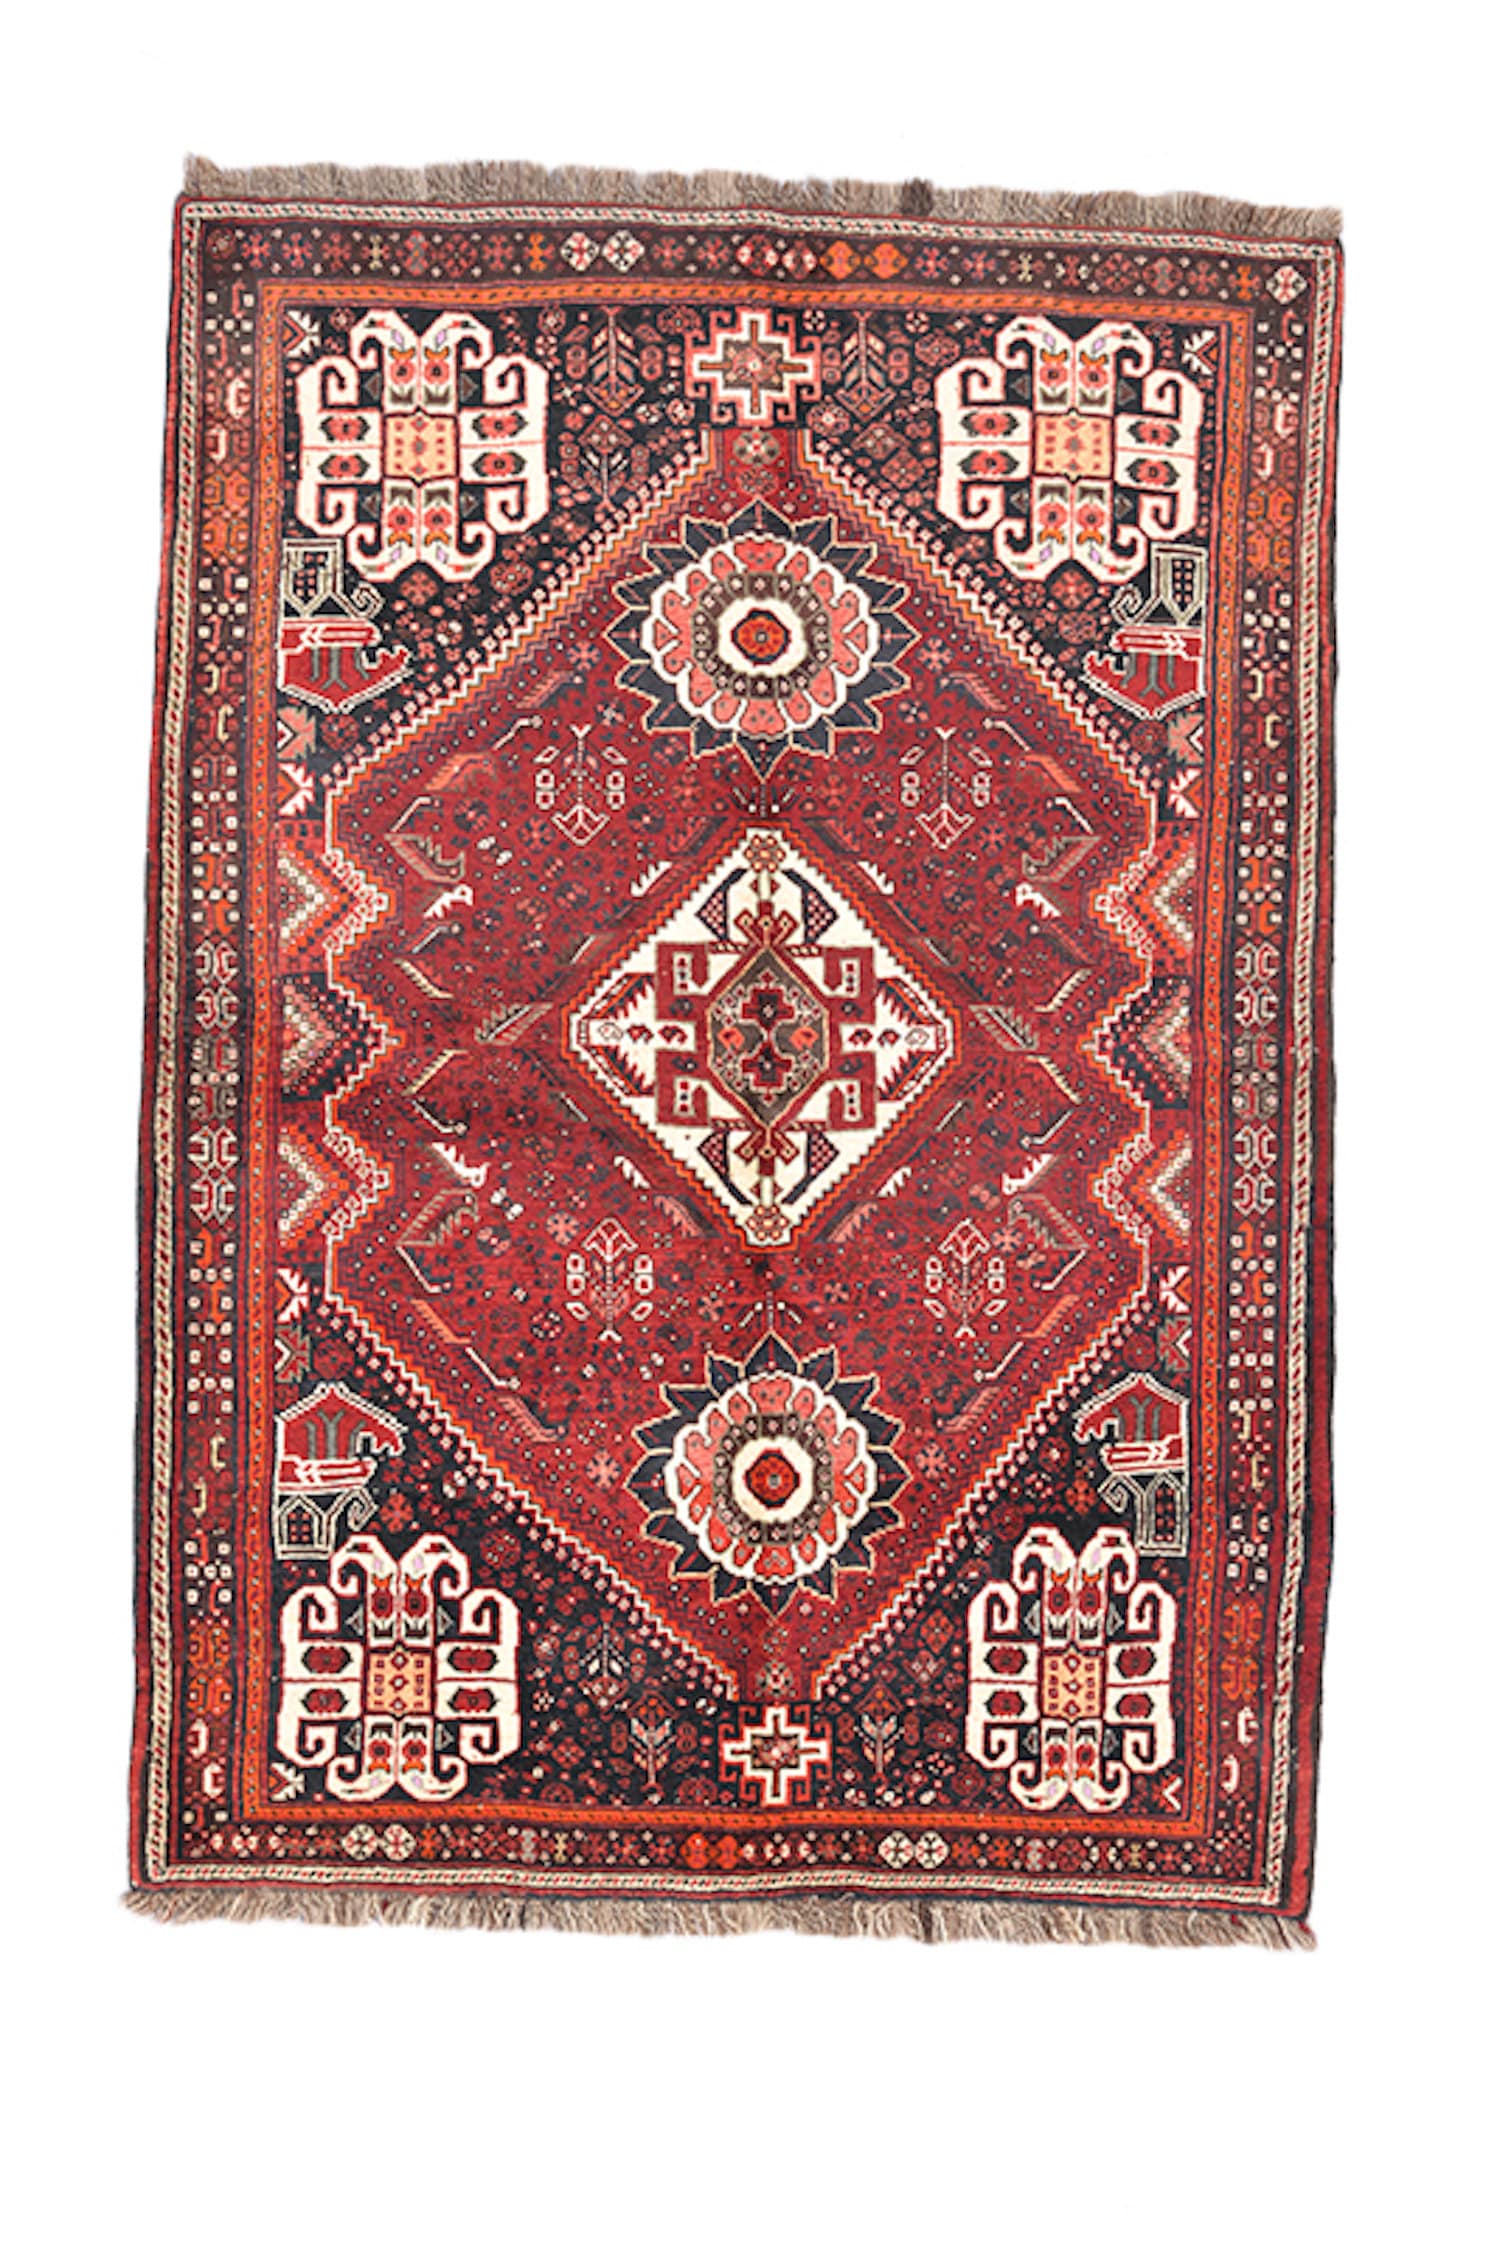 Tribal Hexagon Oriental Rug | 4 x 6 ft | Bright Red Rug | Boho Rustic Rug | Accent Kitchen Rug | Persian Caucasian Rug | 100% Wool